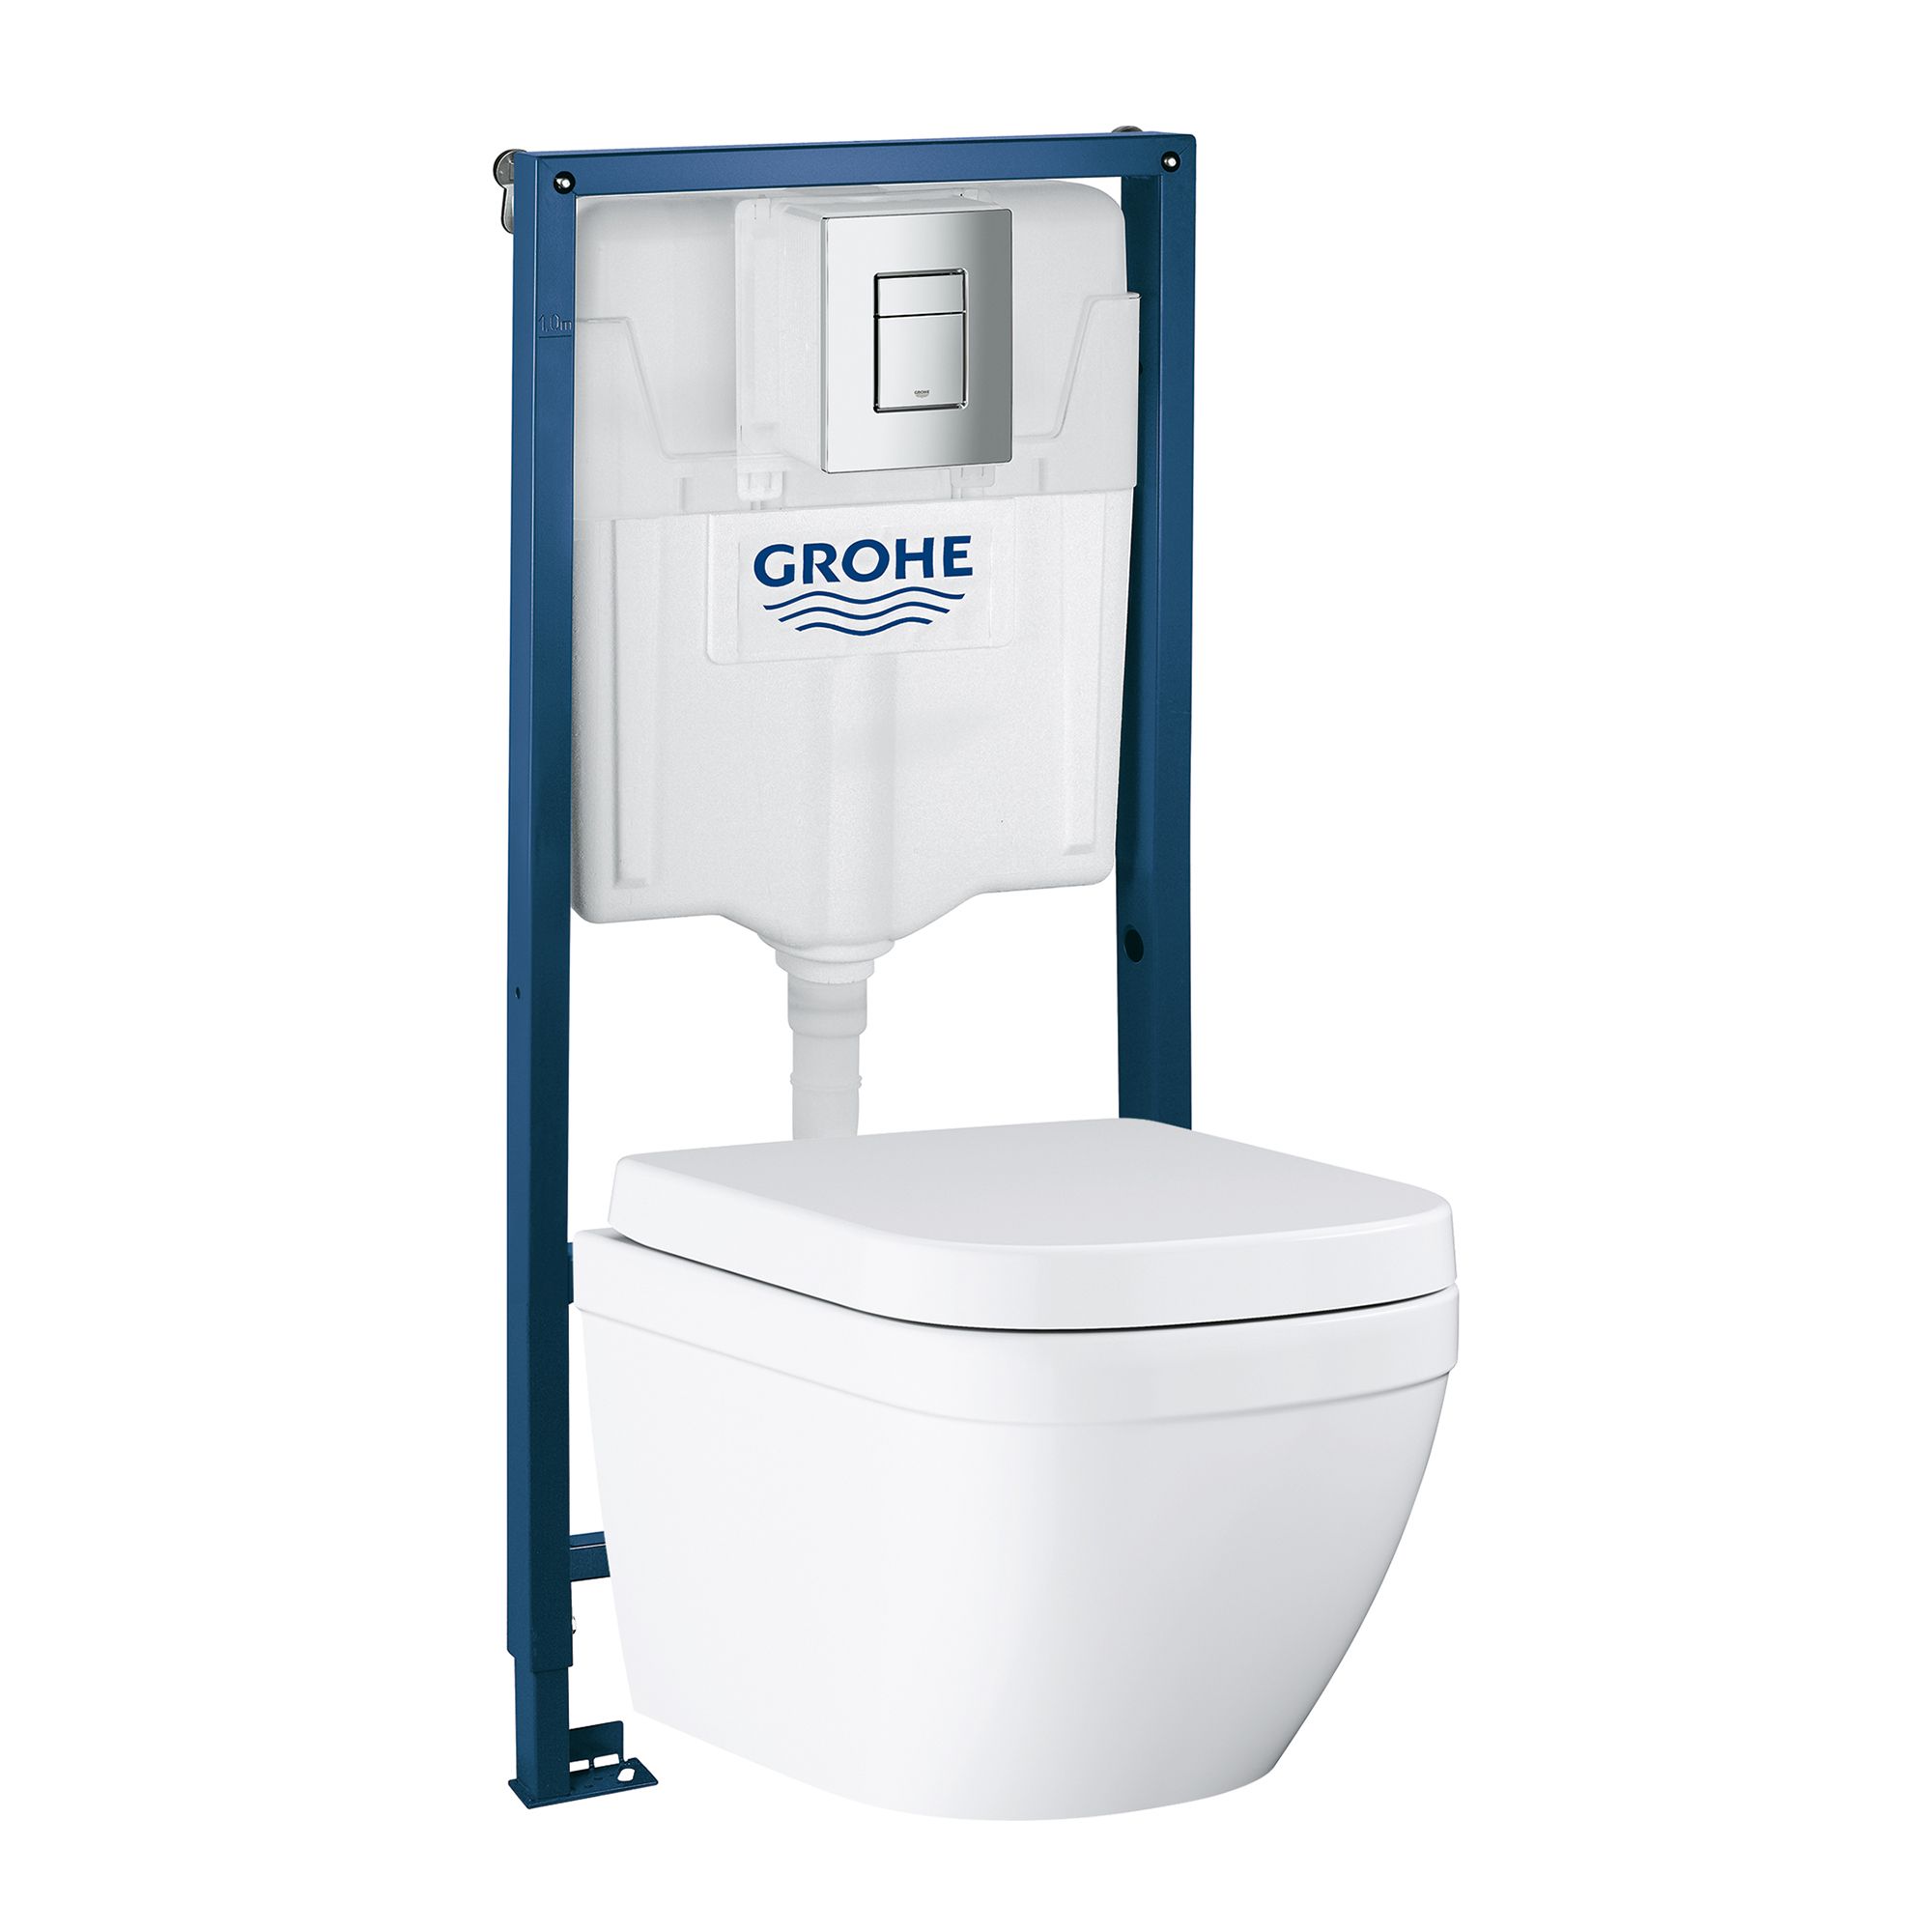 Grohe Euro Contemporary Wall hung Rimless Standard Toilet & cistern with Soft close seat | DIY at